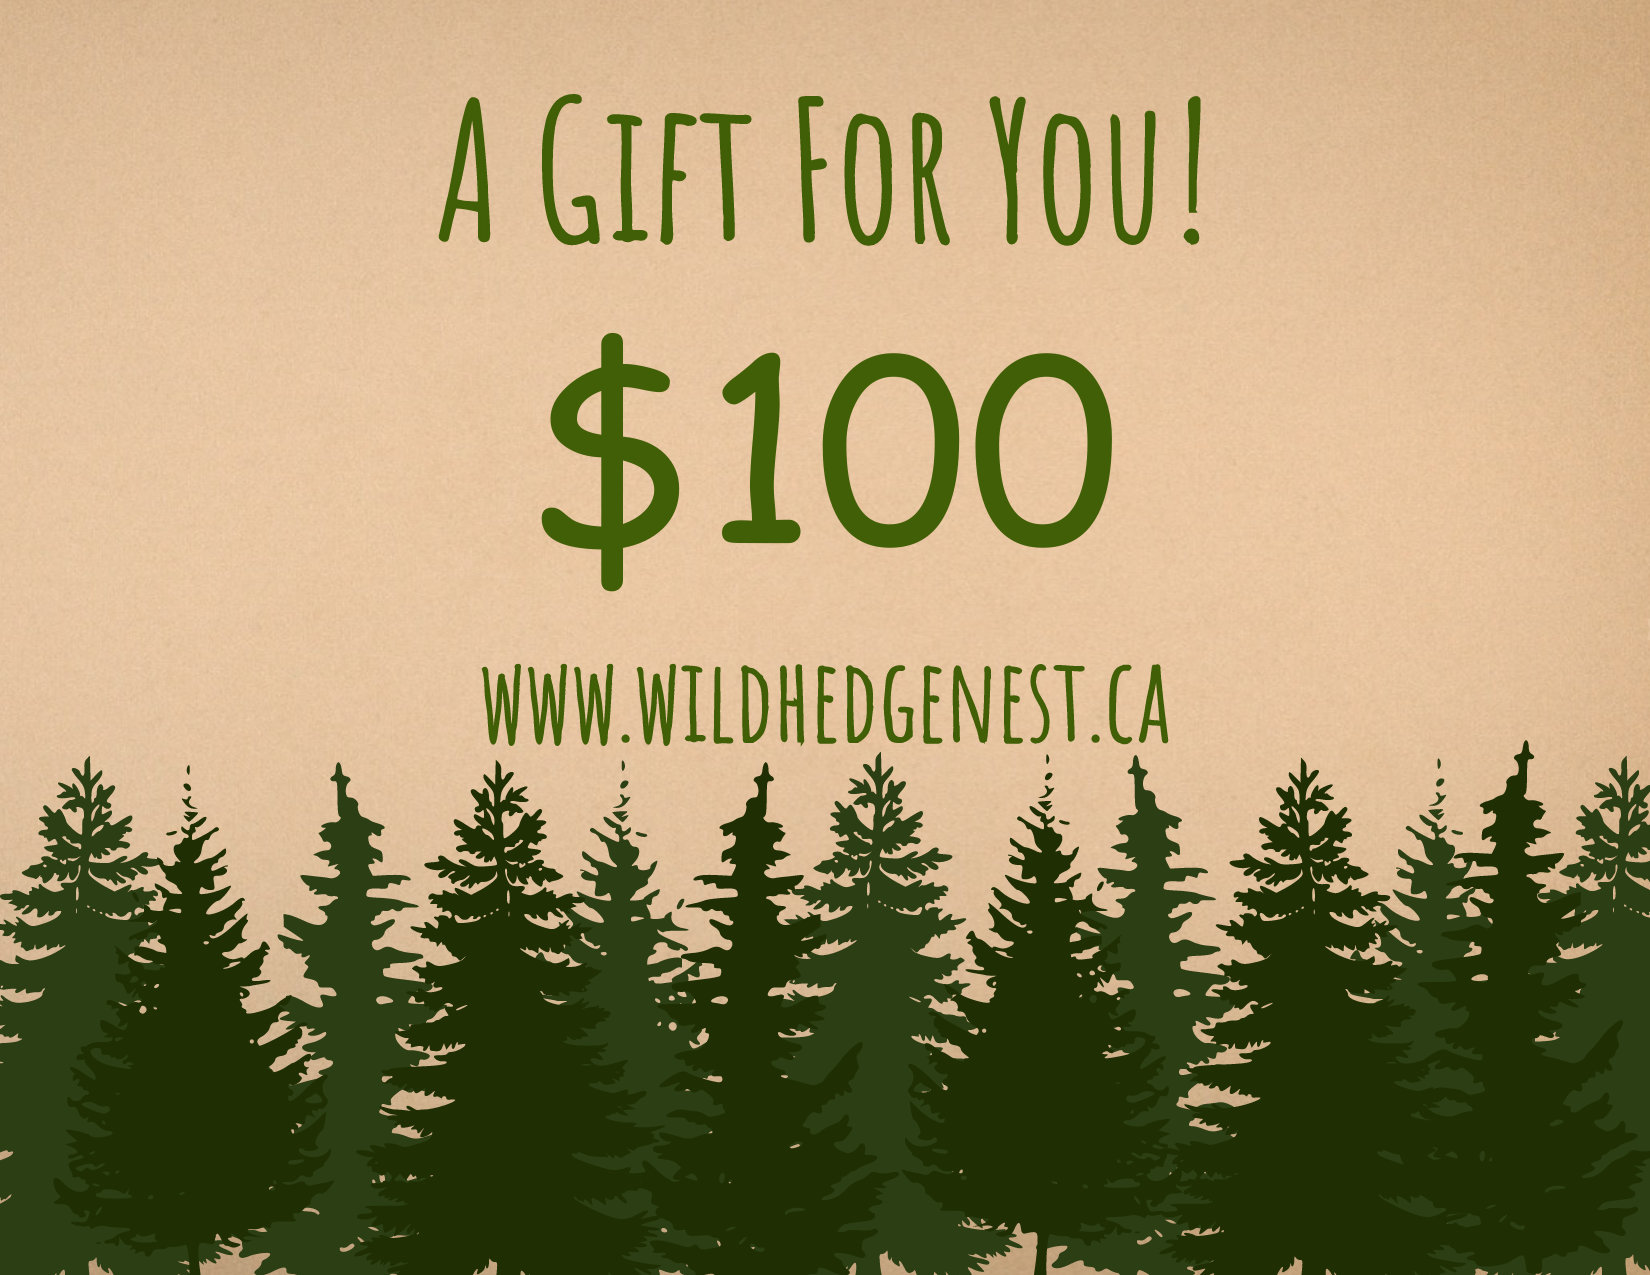 5 $100 WILD HEDGE NEST FOREST e-GIFT CARD